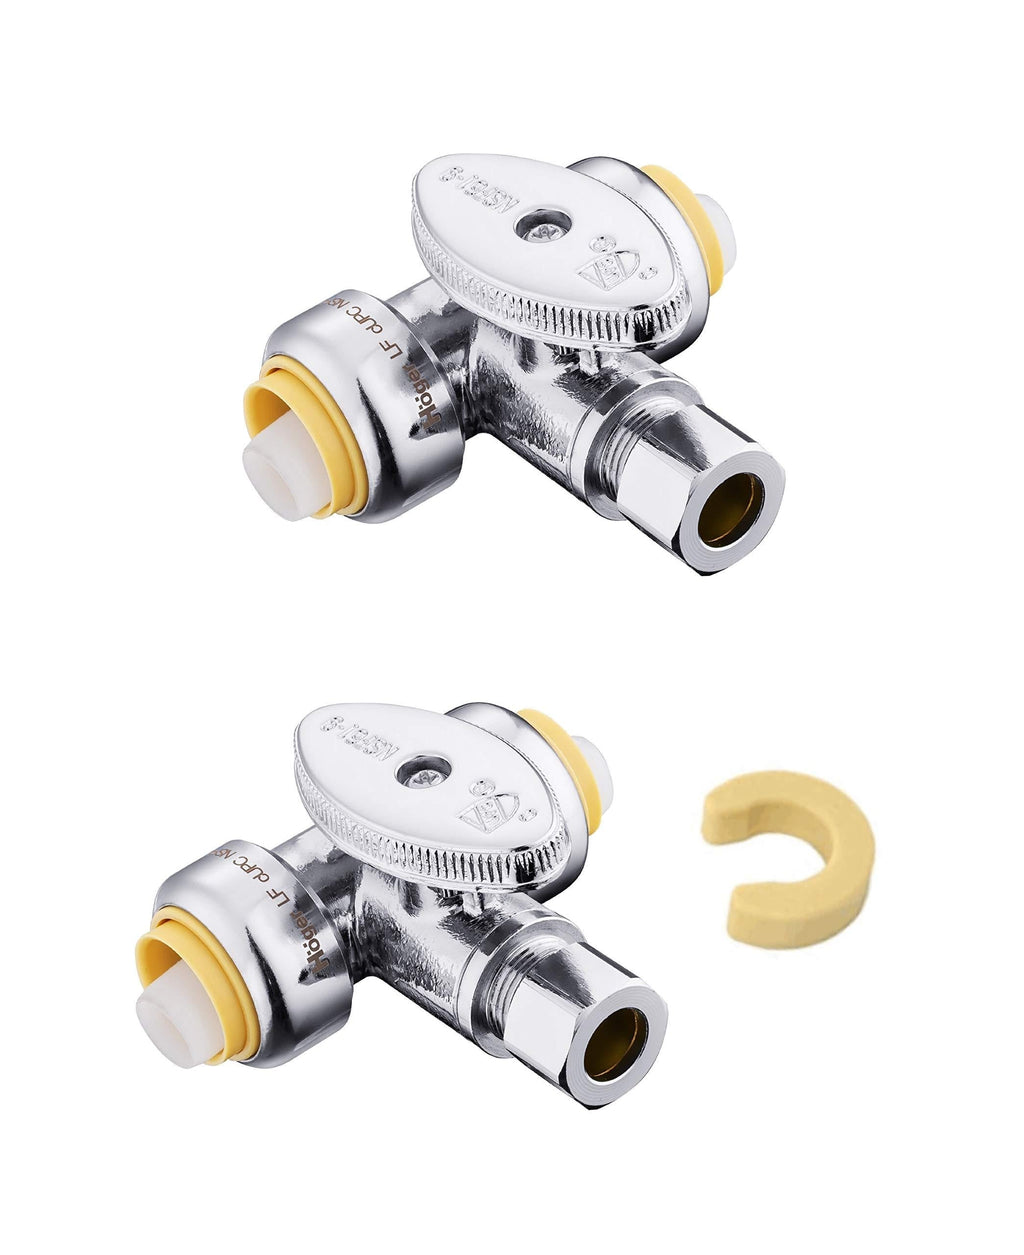 (Pack of 2) EFIELD Push Fit Tee Stop Valve 1/2" Push x 1/2" Push x 3/8" OD,1/4 Turn Water Shut Off Valve Chrome With A Disconnect Clip-2 Pieces - NewNest Australia